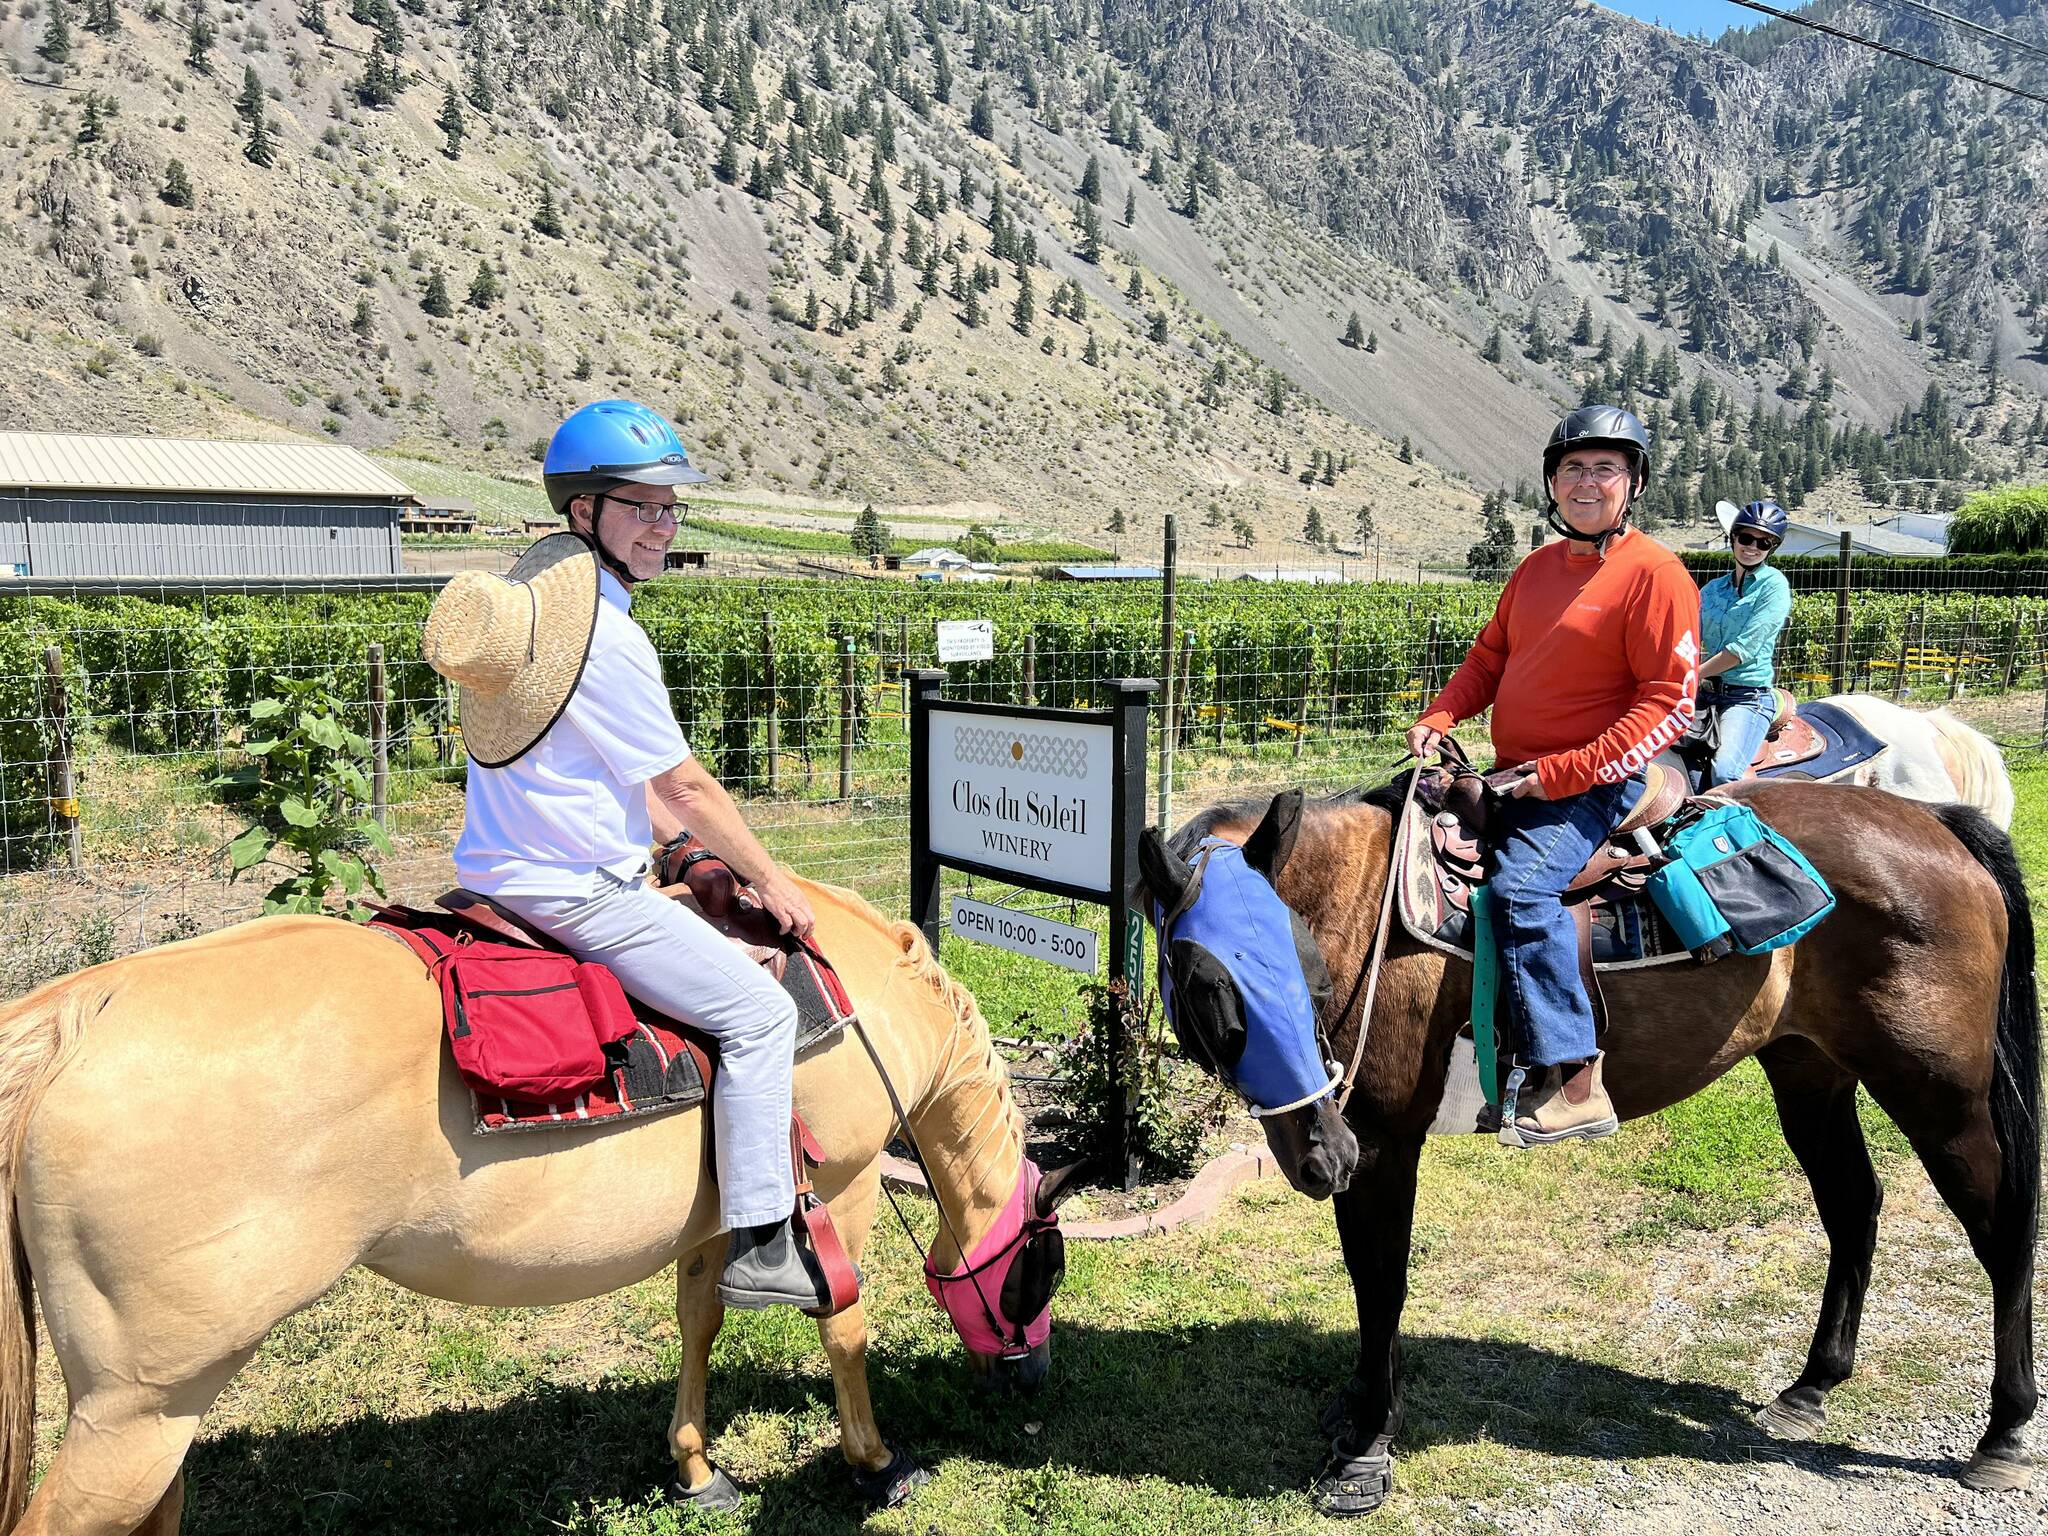 Riders enjoying a stop at a Similkameen winery (notice the wine bottle in the saddle bag. (Submitted)